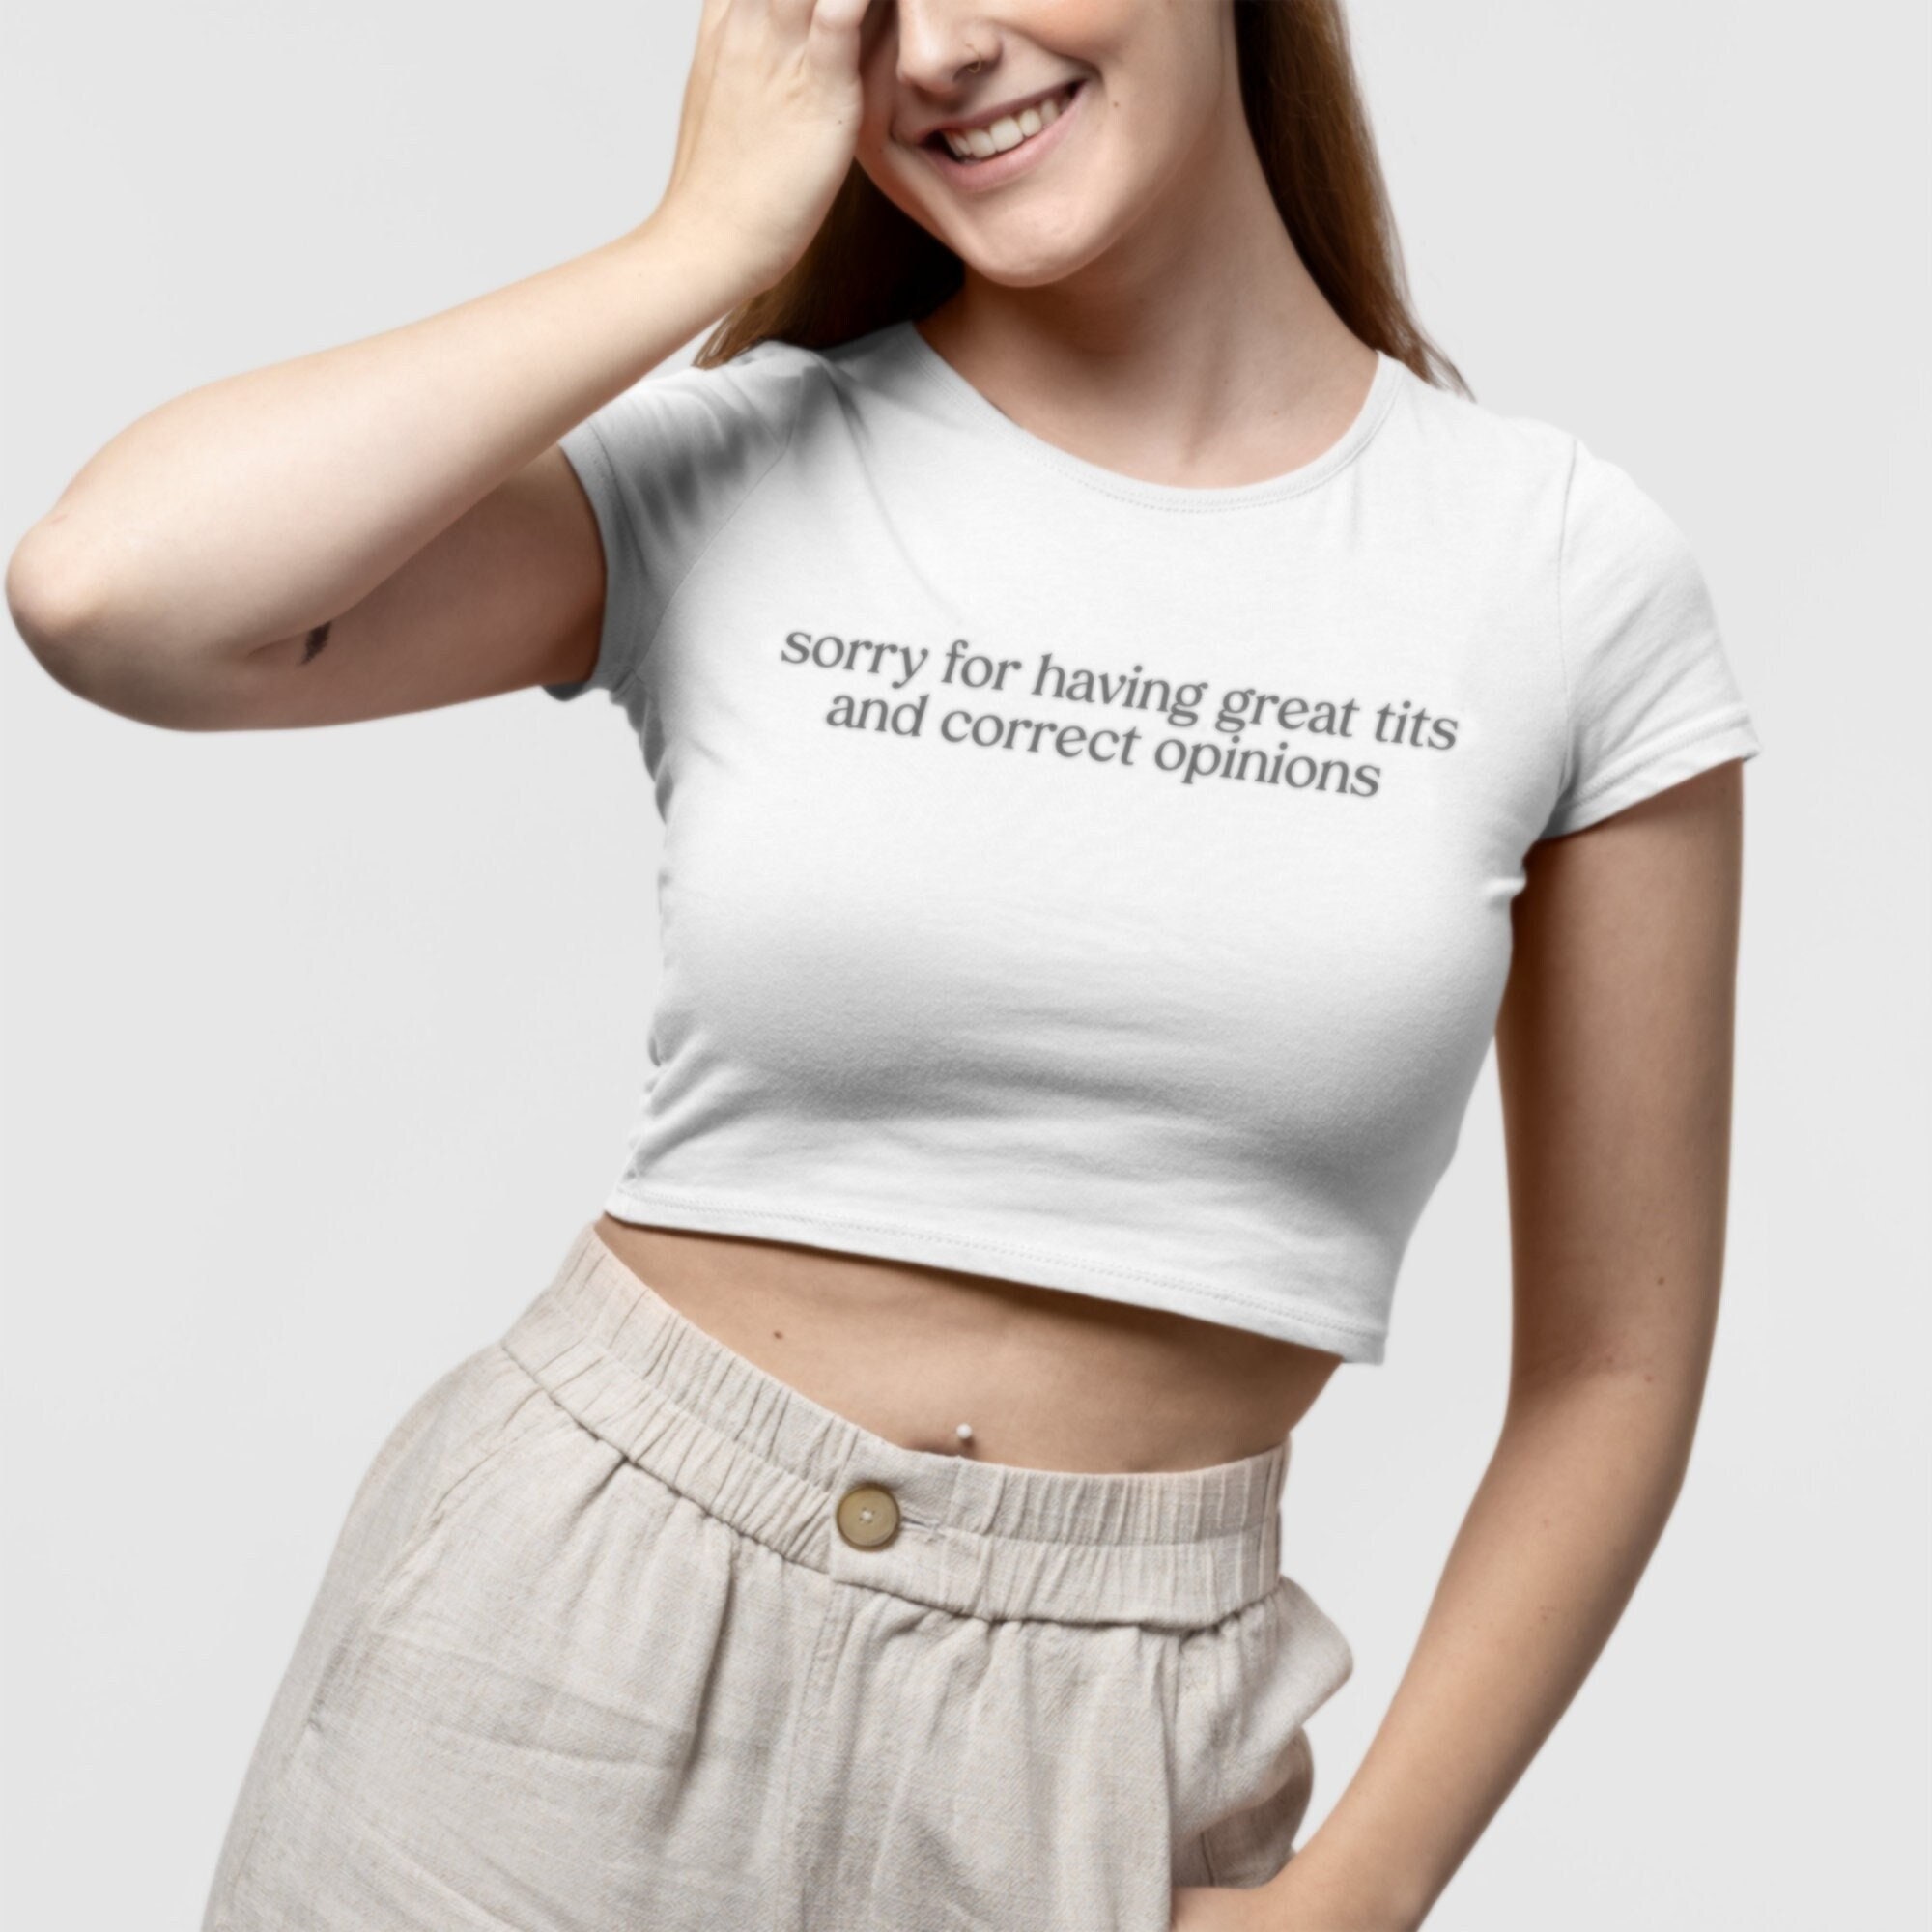 Sorry for Having Great Tits and Correct Opinions on Everything Baby Tee,  Funny Great Tits Crop Top Shirt 